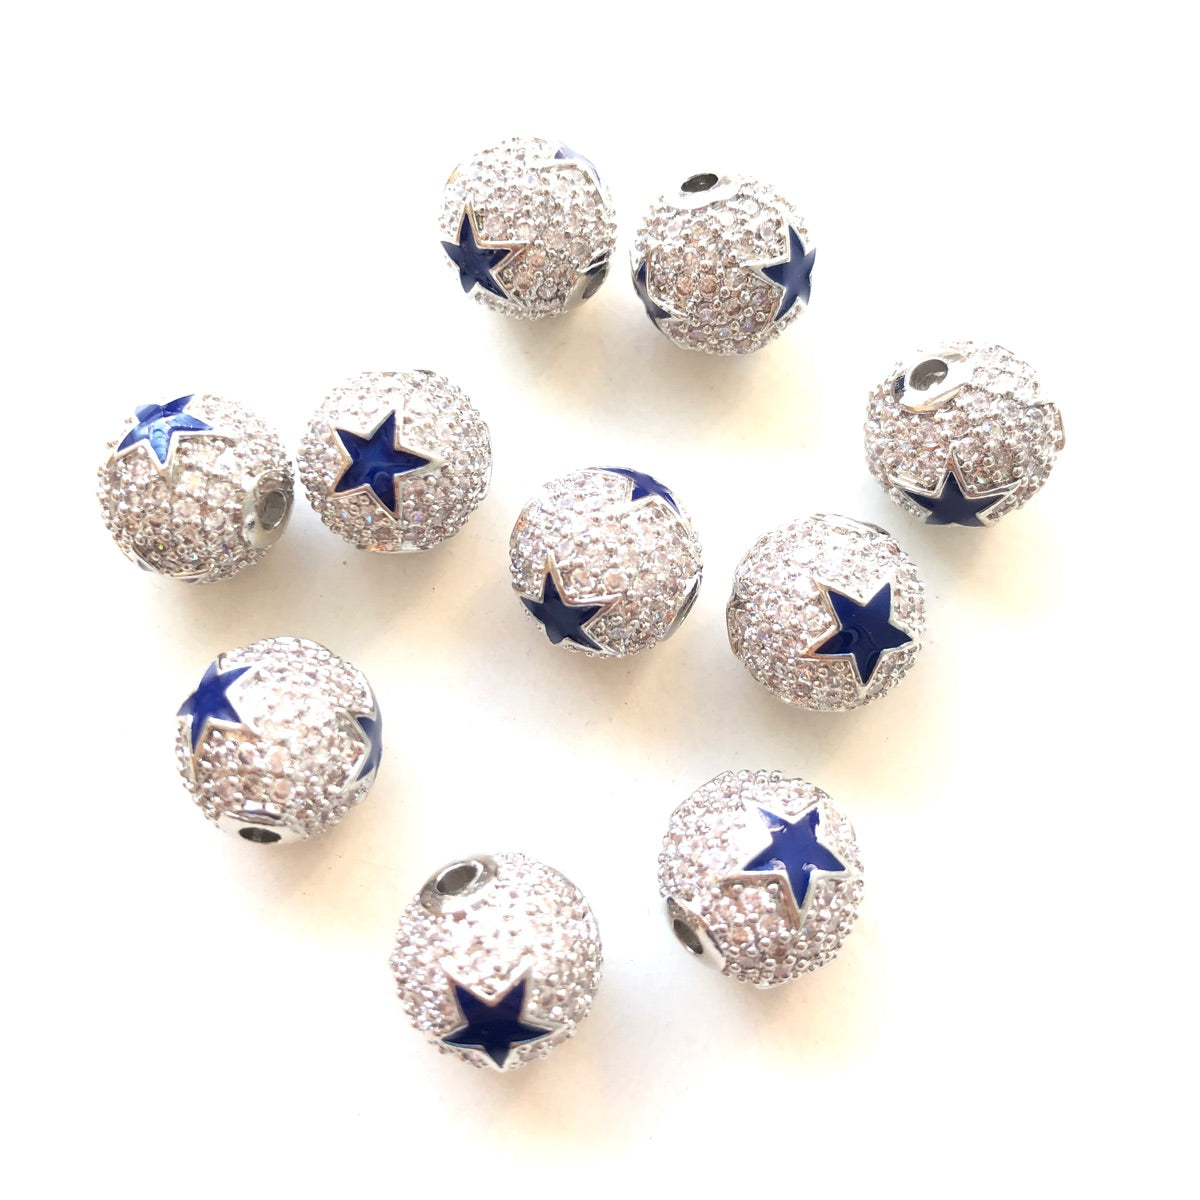 10-20pcs/lot 10mm CZ Paved Cowboys Star Ball Spacers Beads Silver CZ Paved Spacers 10mm Beads American Football Sports Ball Beads New Spacers Arrivals Charms Beads Beyond